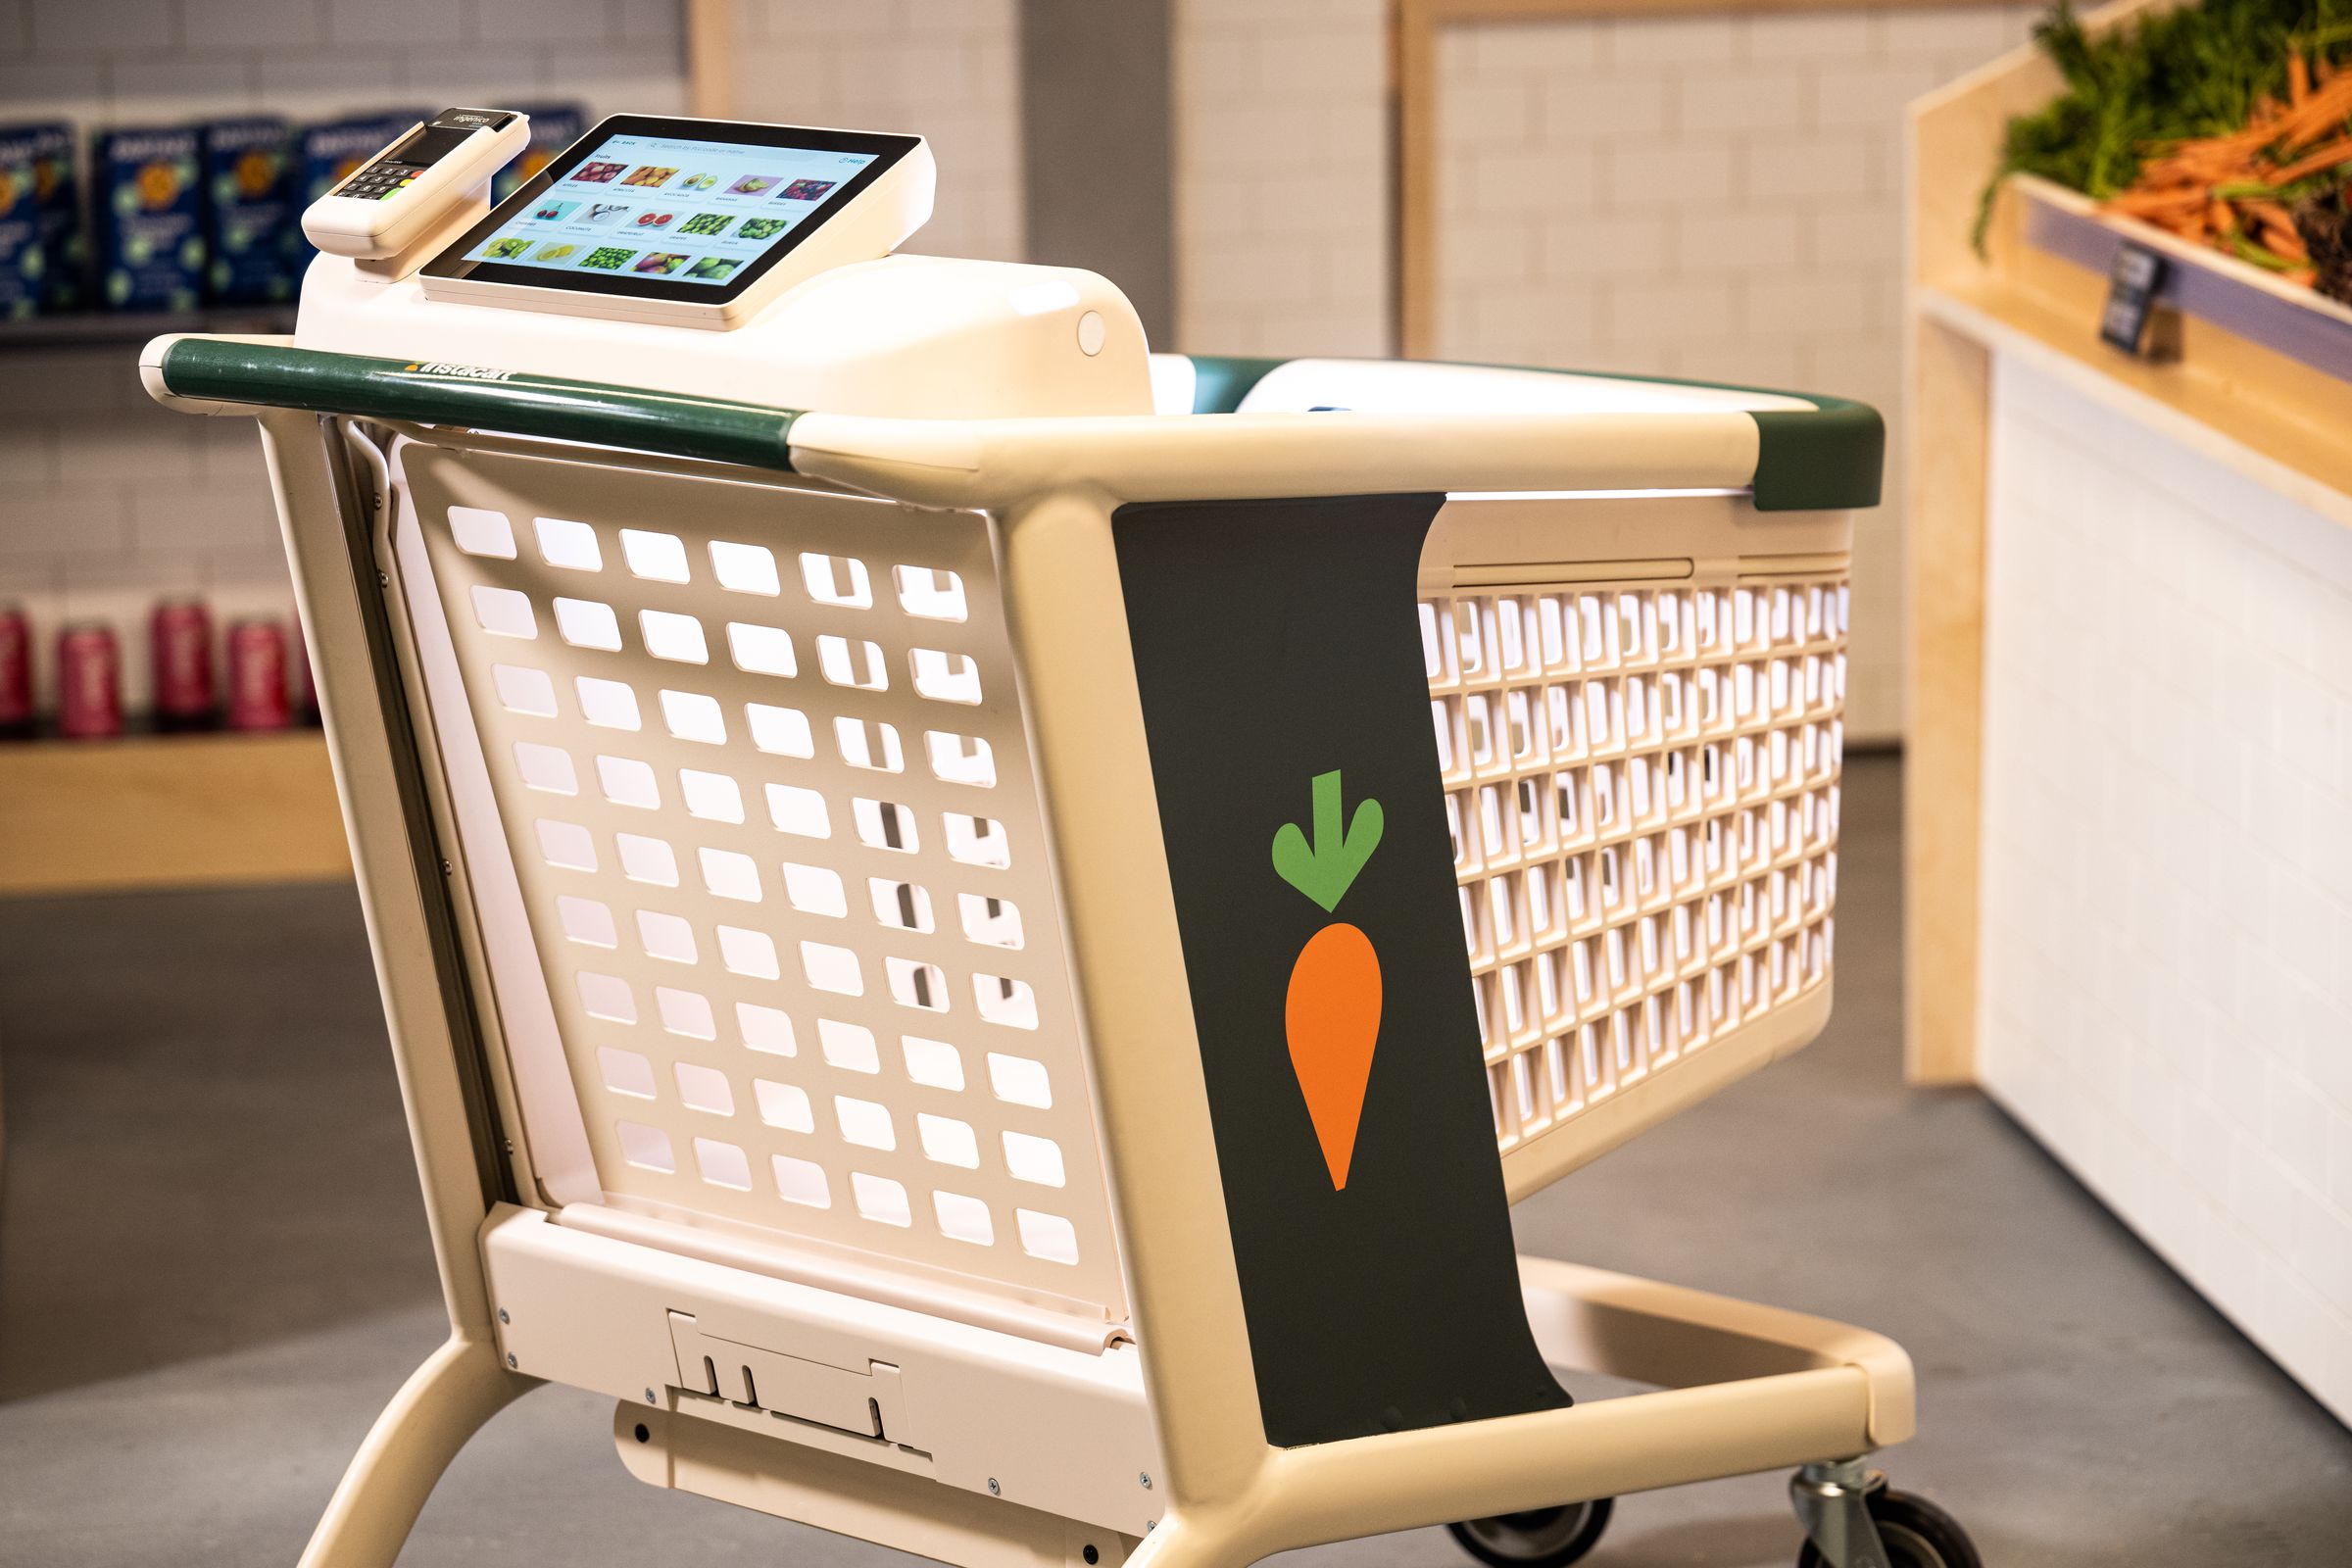 In the middle of a modern grocery store, with smooth concrete flooring, white oak shelving and white tiled walls, there’s a beige and thick-bodied plastic shopping cart. The cart has a big orange and green carrot logo printed on the side, and a tablet computer affixed to the top where a child would normally sit, as well as a digital payment terminal.